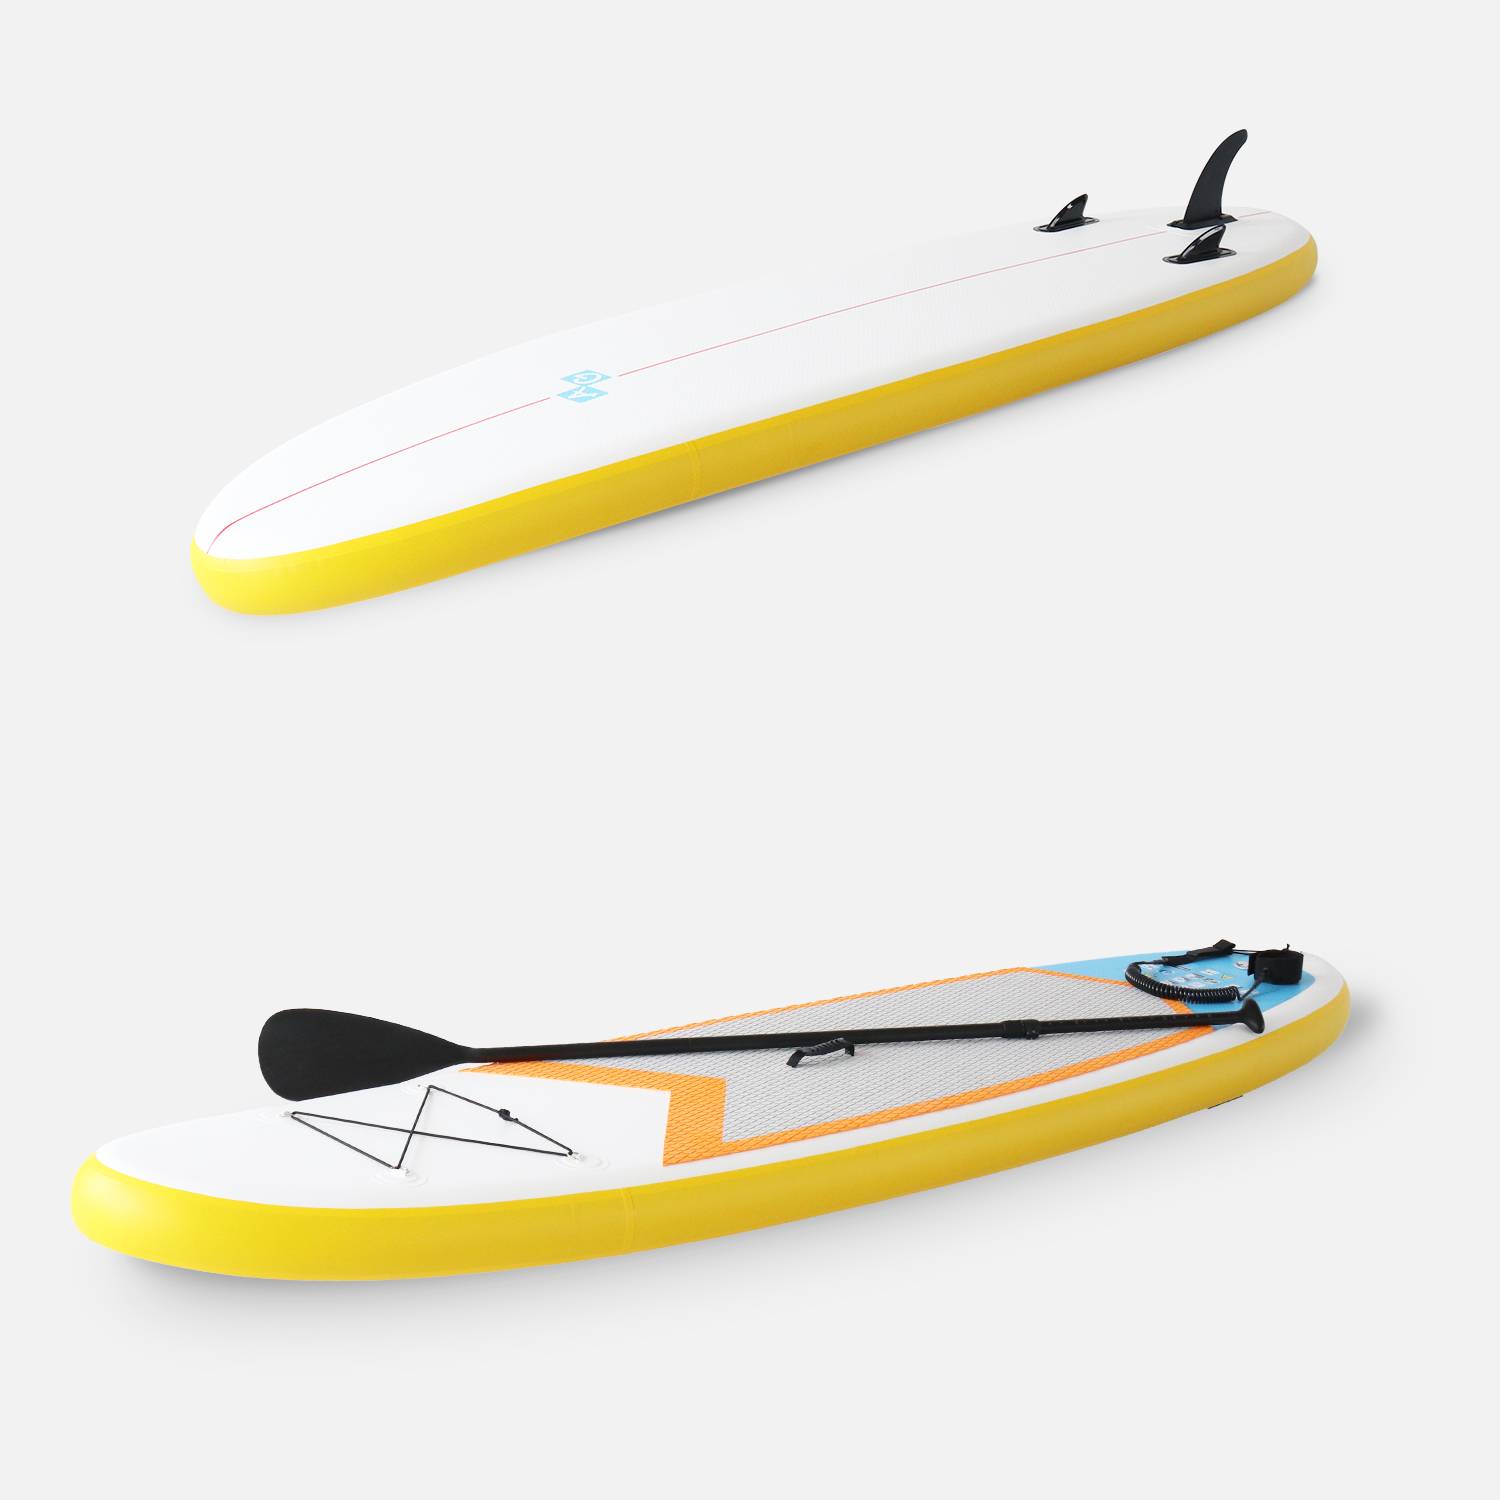 9.84FT Inflatable Stand Up Paddle Board - SUP kit with double-action high-pressure pump, paddle, leash and carry bag - Nico - Yellow,sweeek,Photo2